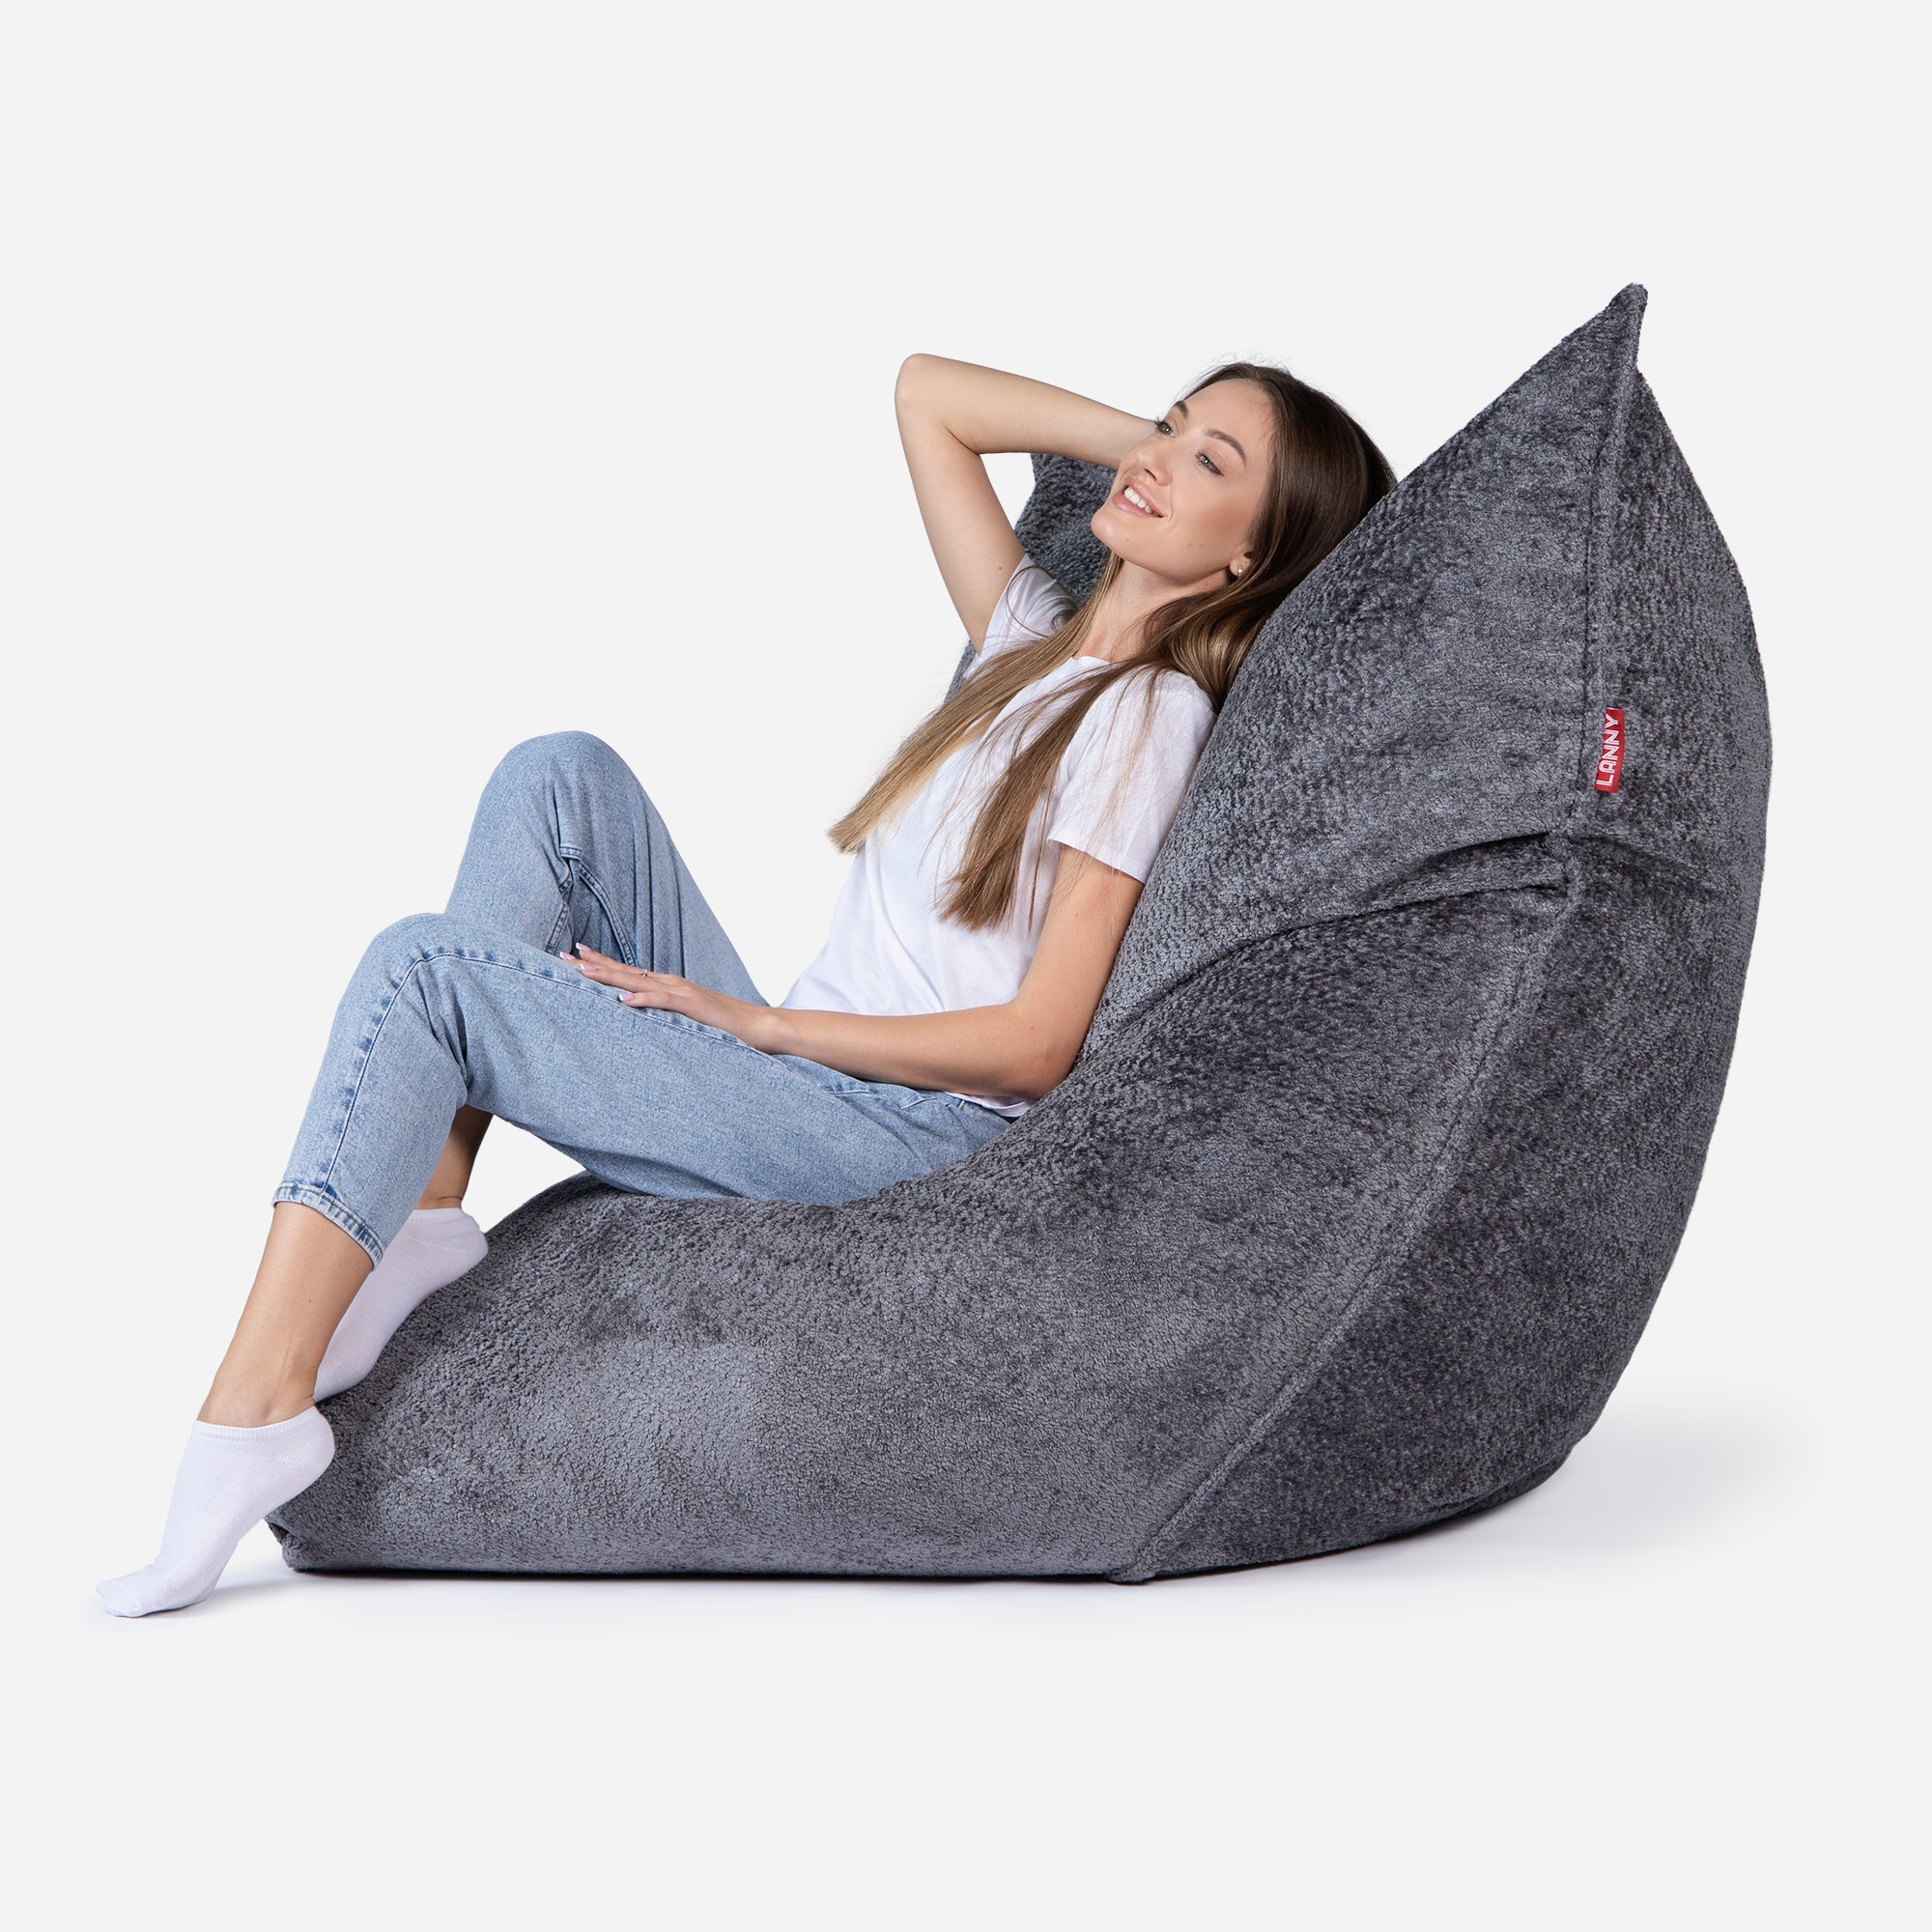 Beanbag Sloppy design fluffy fabric Dark Gray color  with girl seating on it 